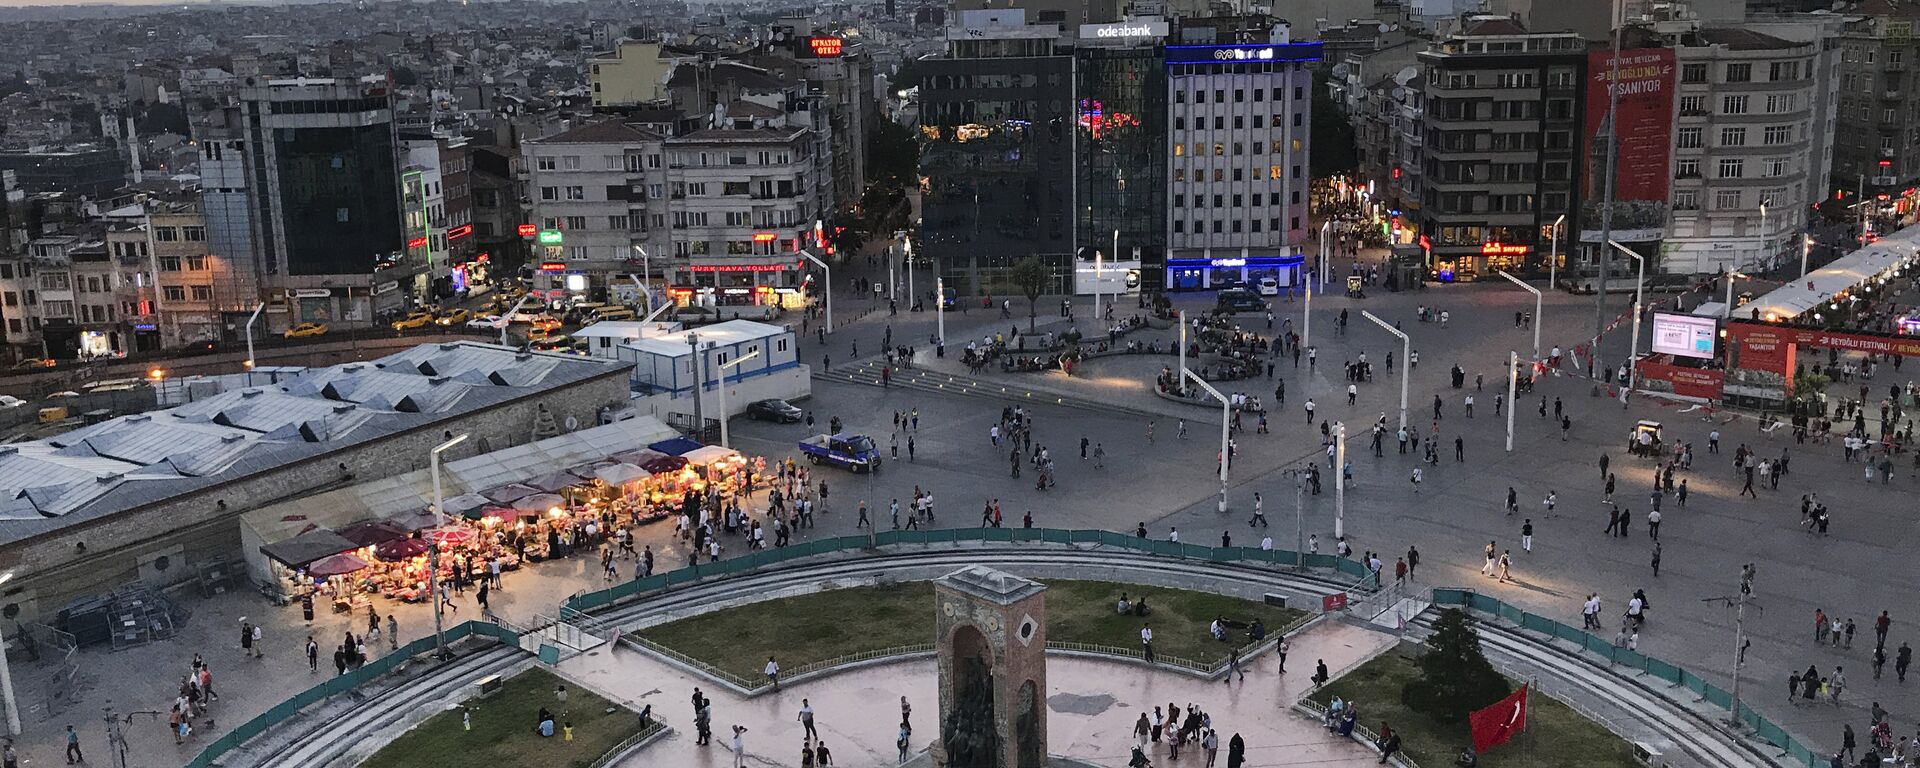 (File) A view of Taksim Square in central Istanbul Monday, July 10, 2017 - Sputnik International, 1920, 02.02.2023